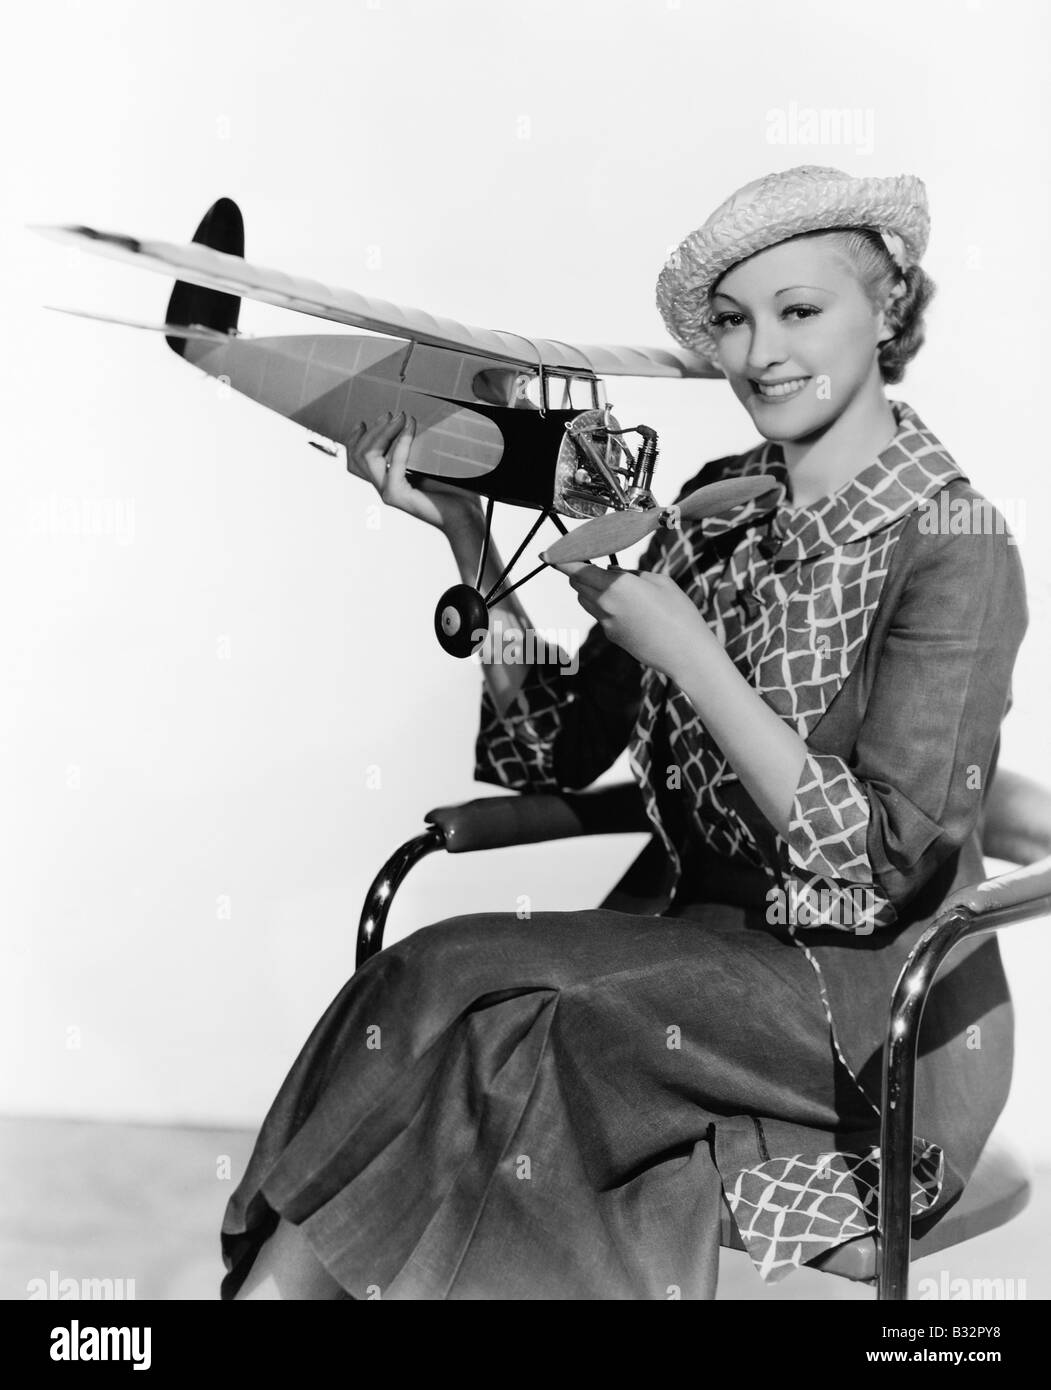 Woman holding model airplane Stock Photo